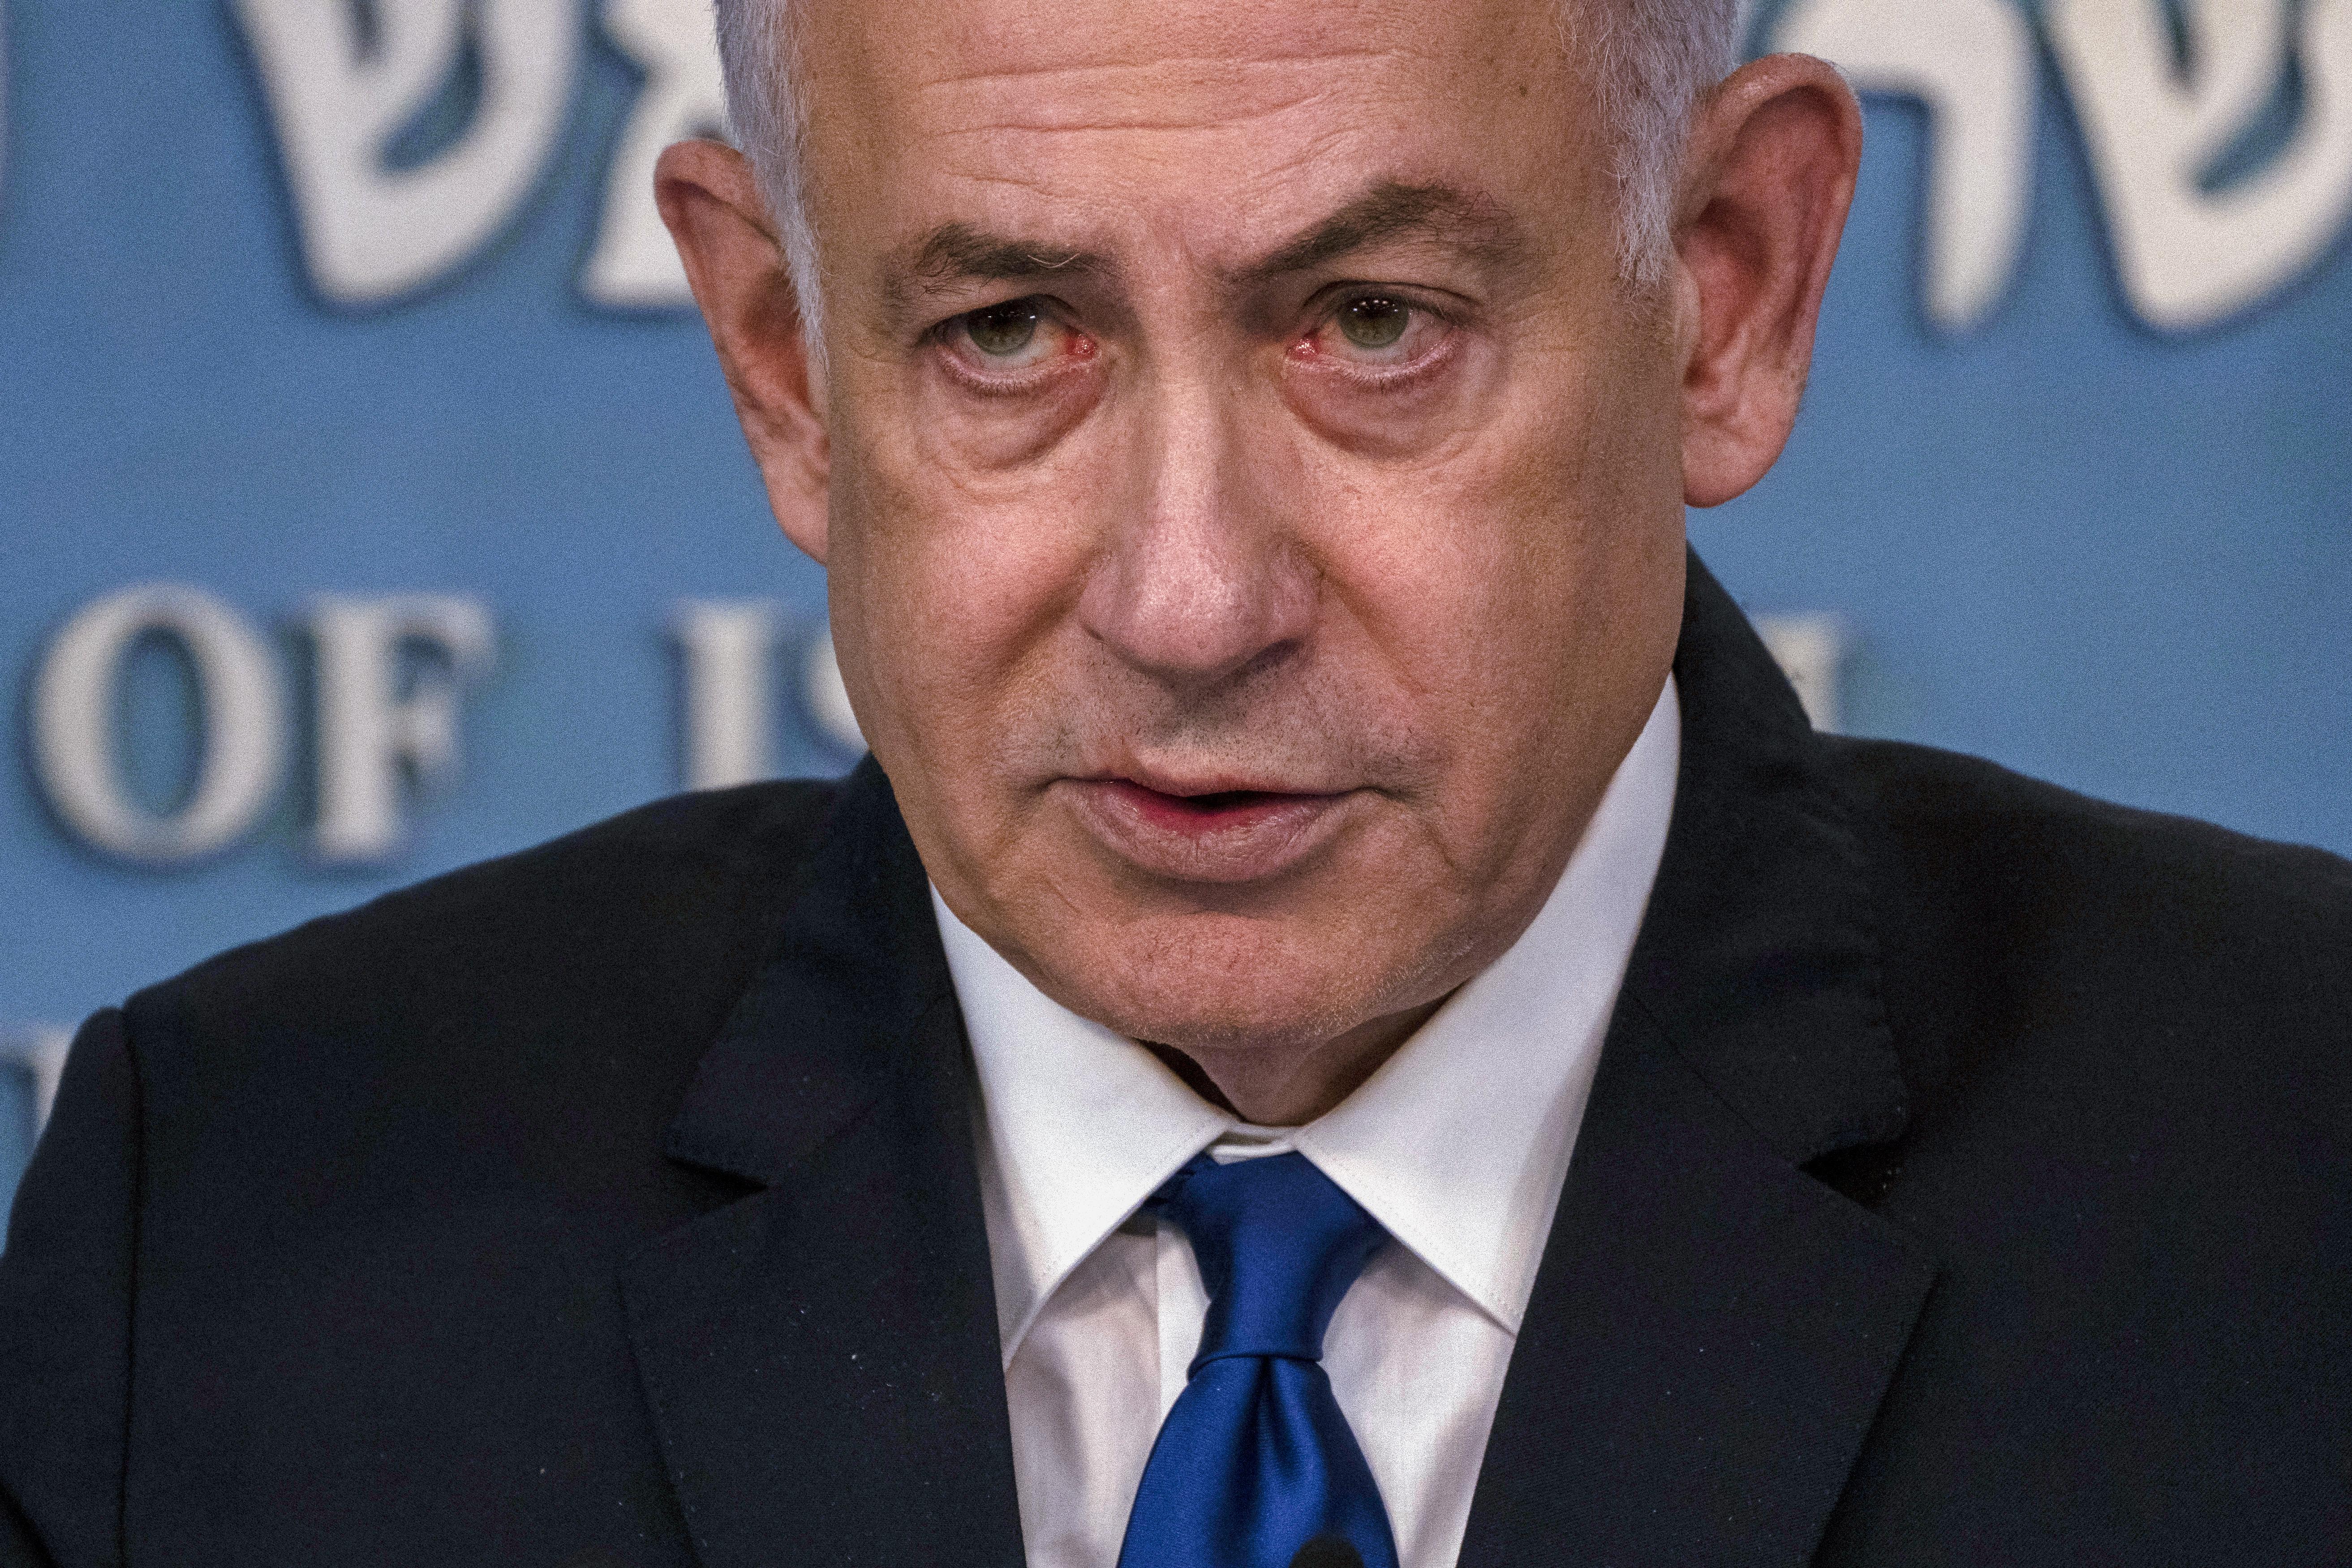 Netanyahu Just Told Biden to Shove It. Seems Like That Could Backfire. Fred Kaplan